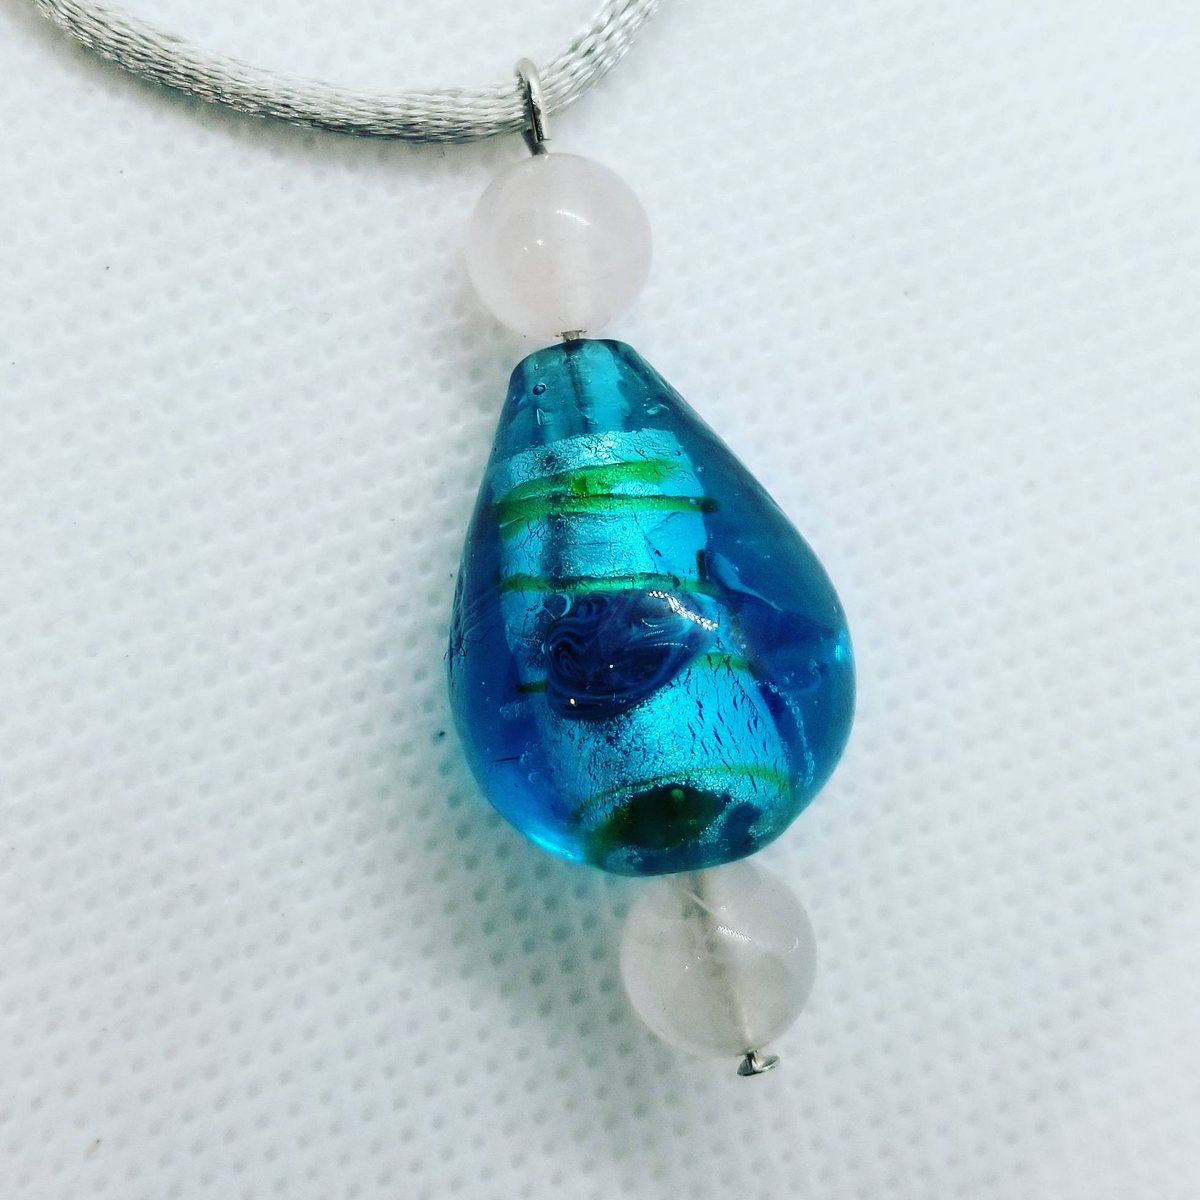 Teal teardrop glass wrapped over silver & #pinkrose & #rosequartz

Shop MBARTICULTURE.COM

#MBArticulture #rosequartzjewelry #tealjewelry #rosenecklace #springjewelry #flowerjewelry #glassjewelry #bohojewelry #handcrafted